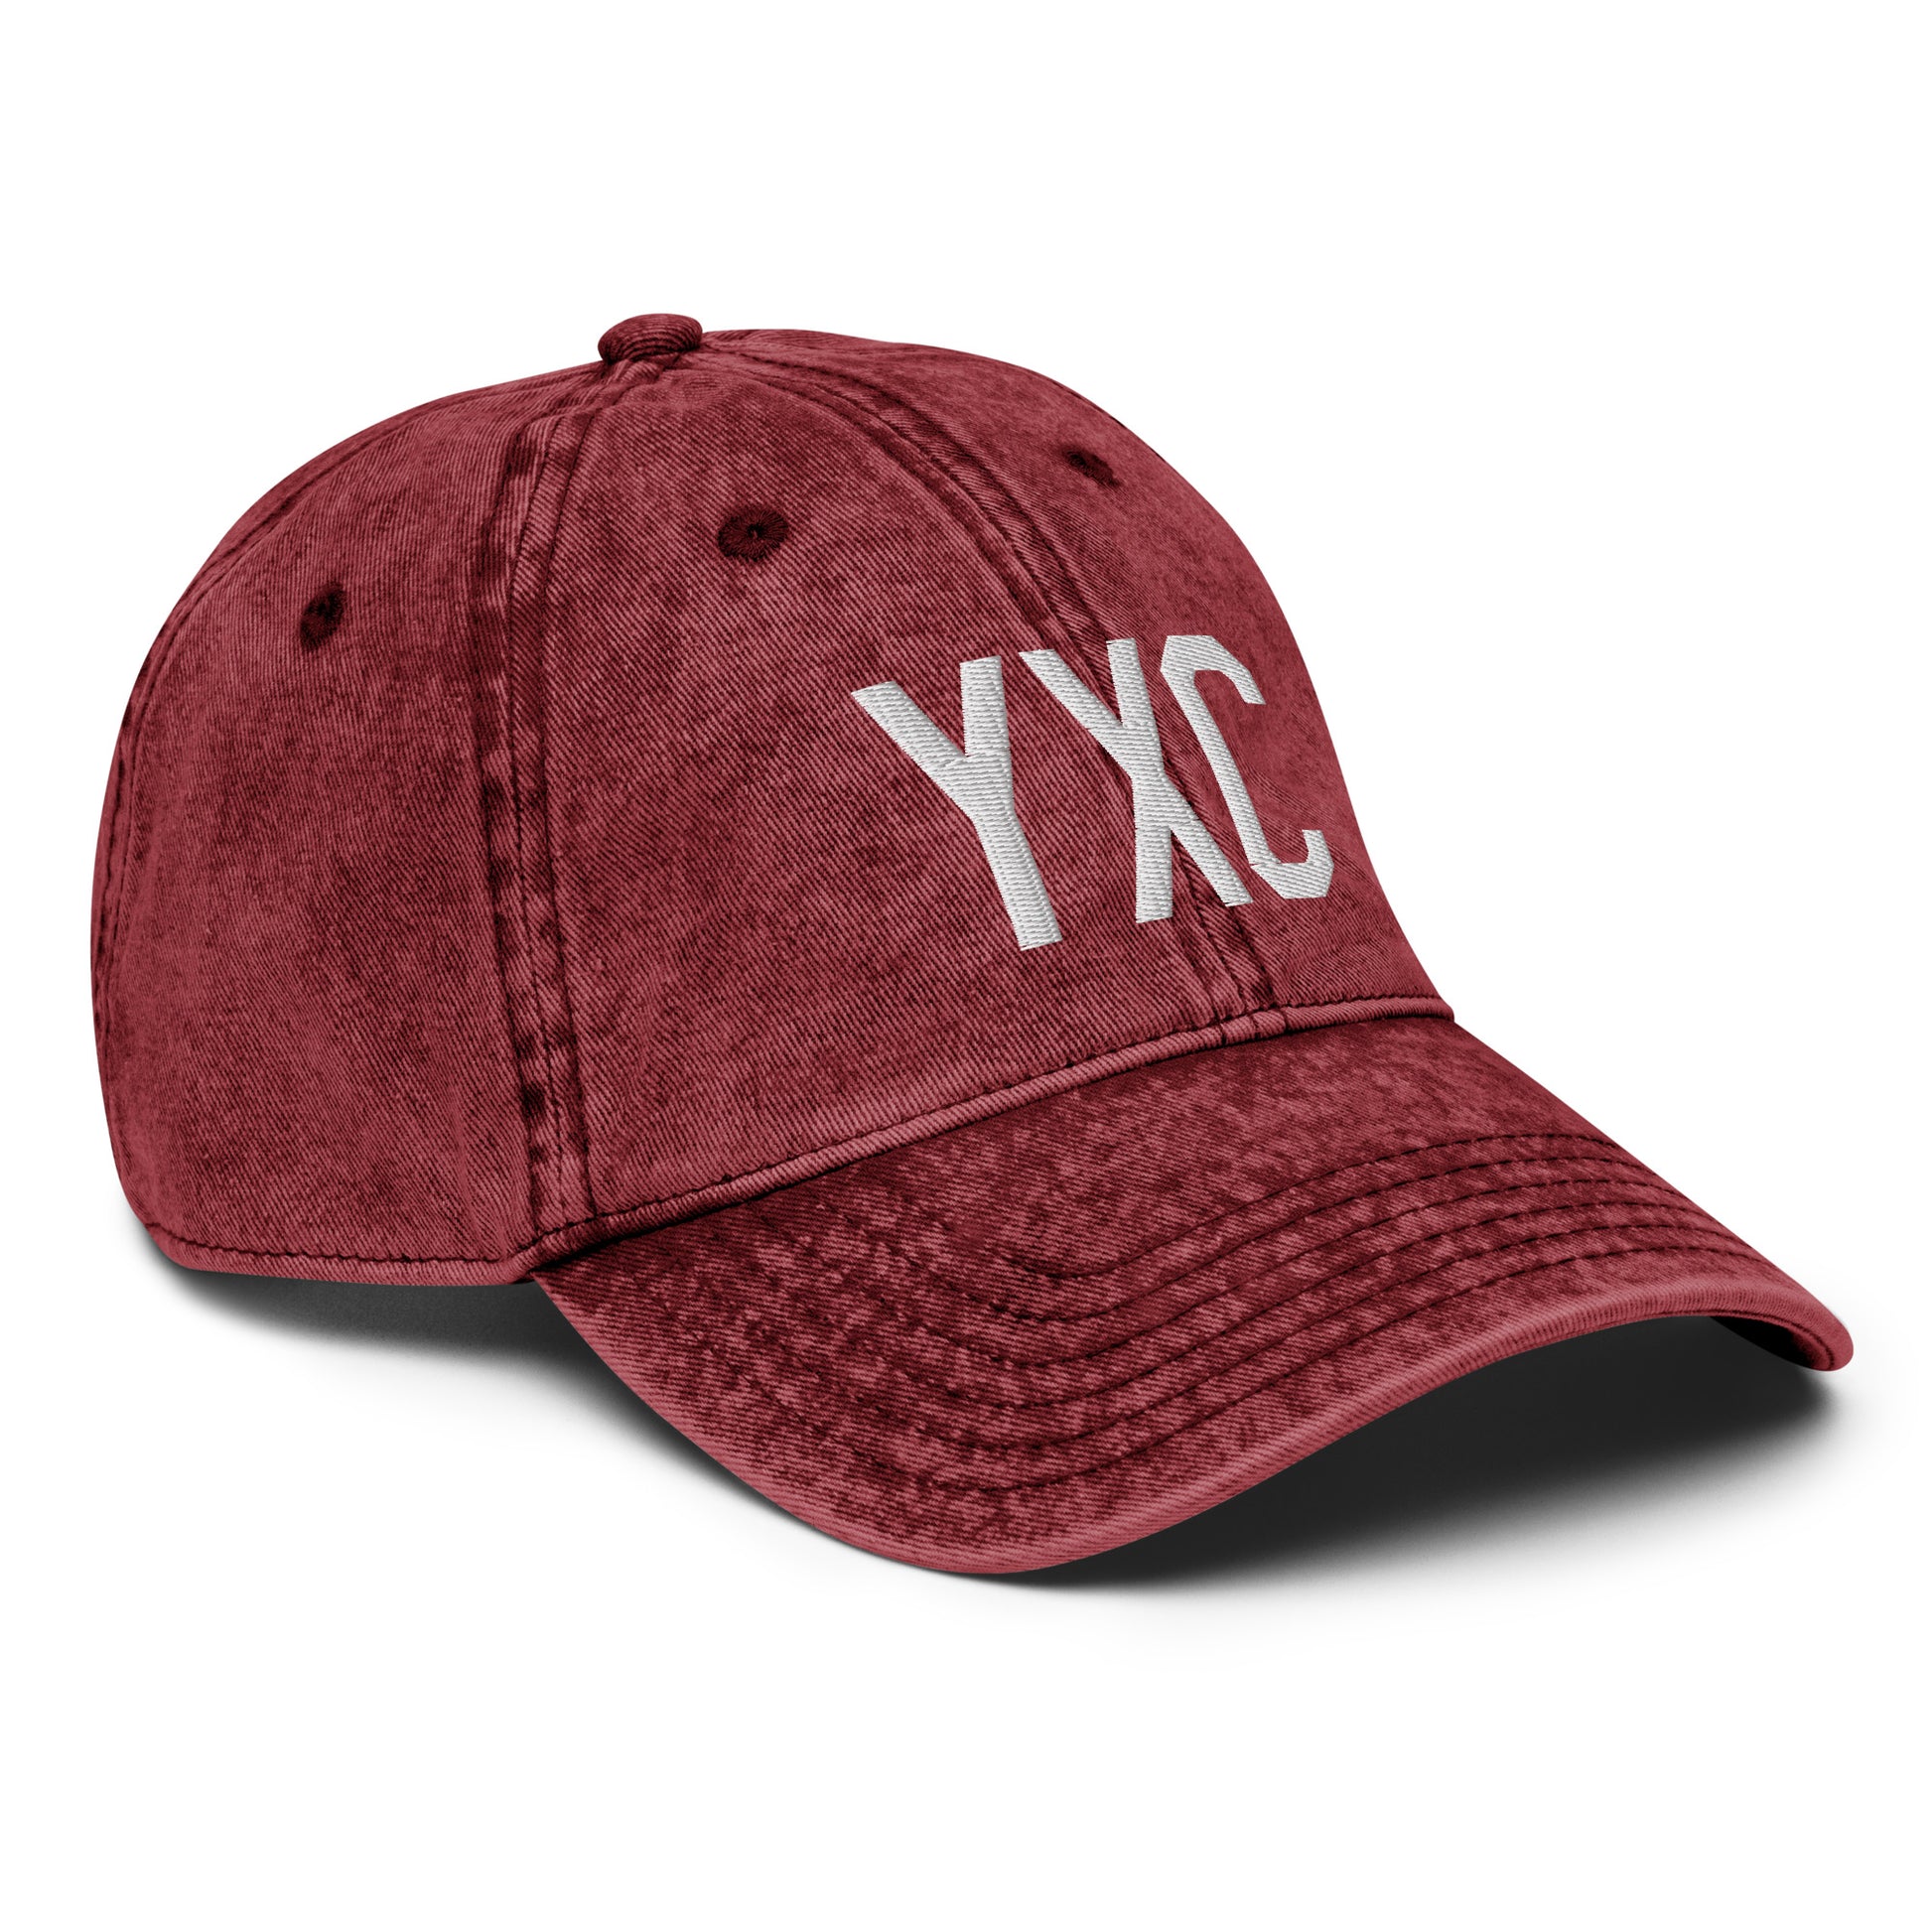 Airport Code Twill Cap - White • YXC Cranbrook • YHM Designs - Image 21